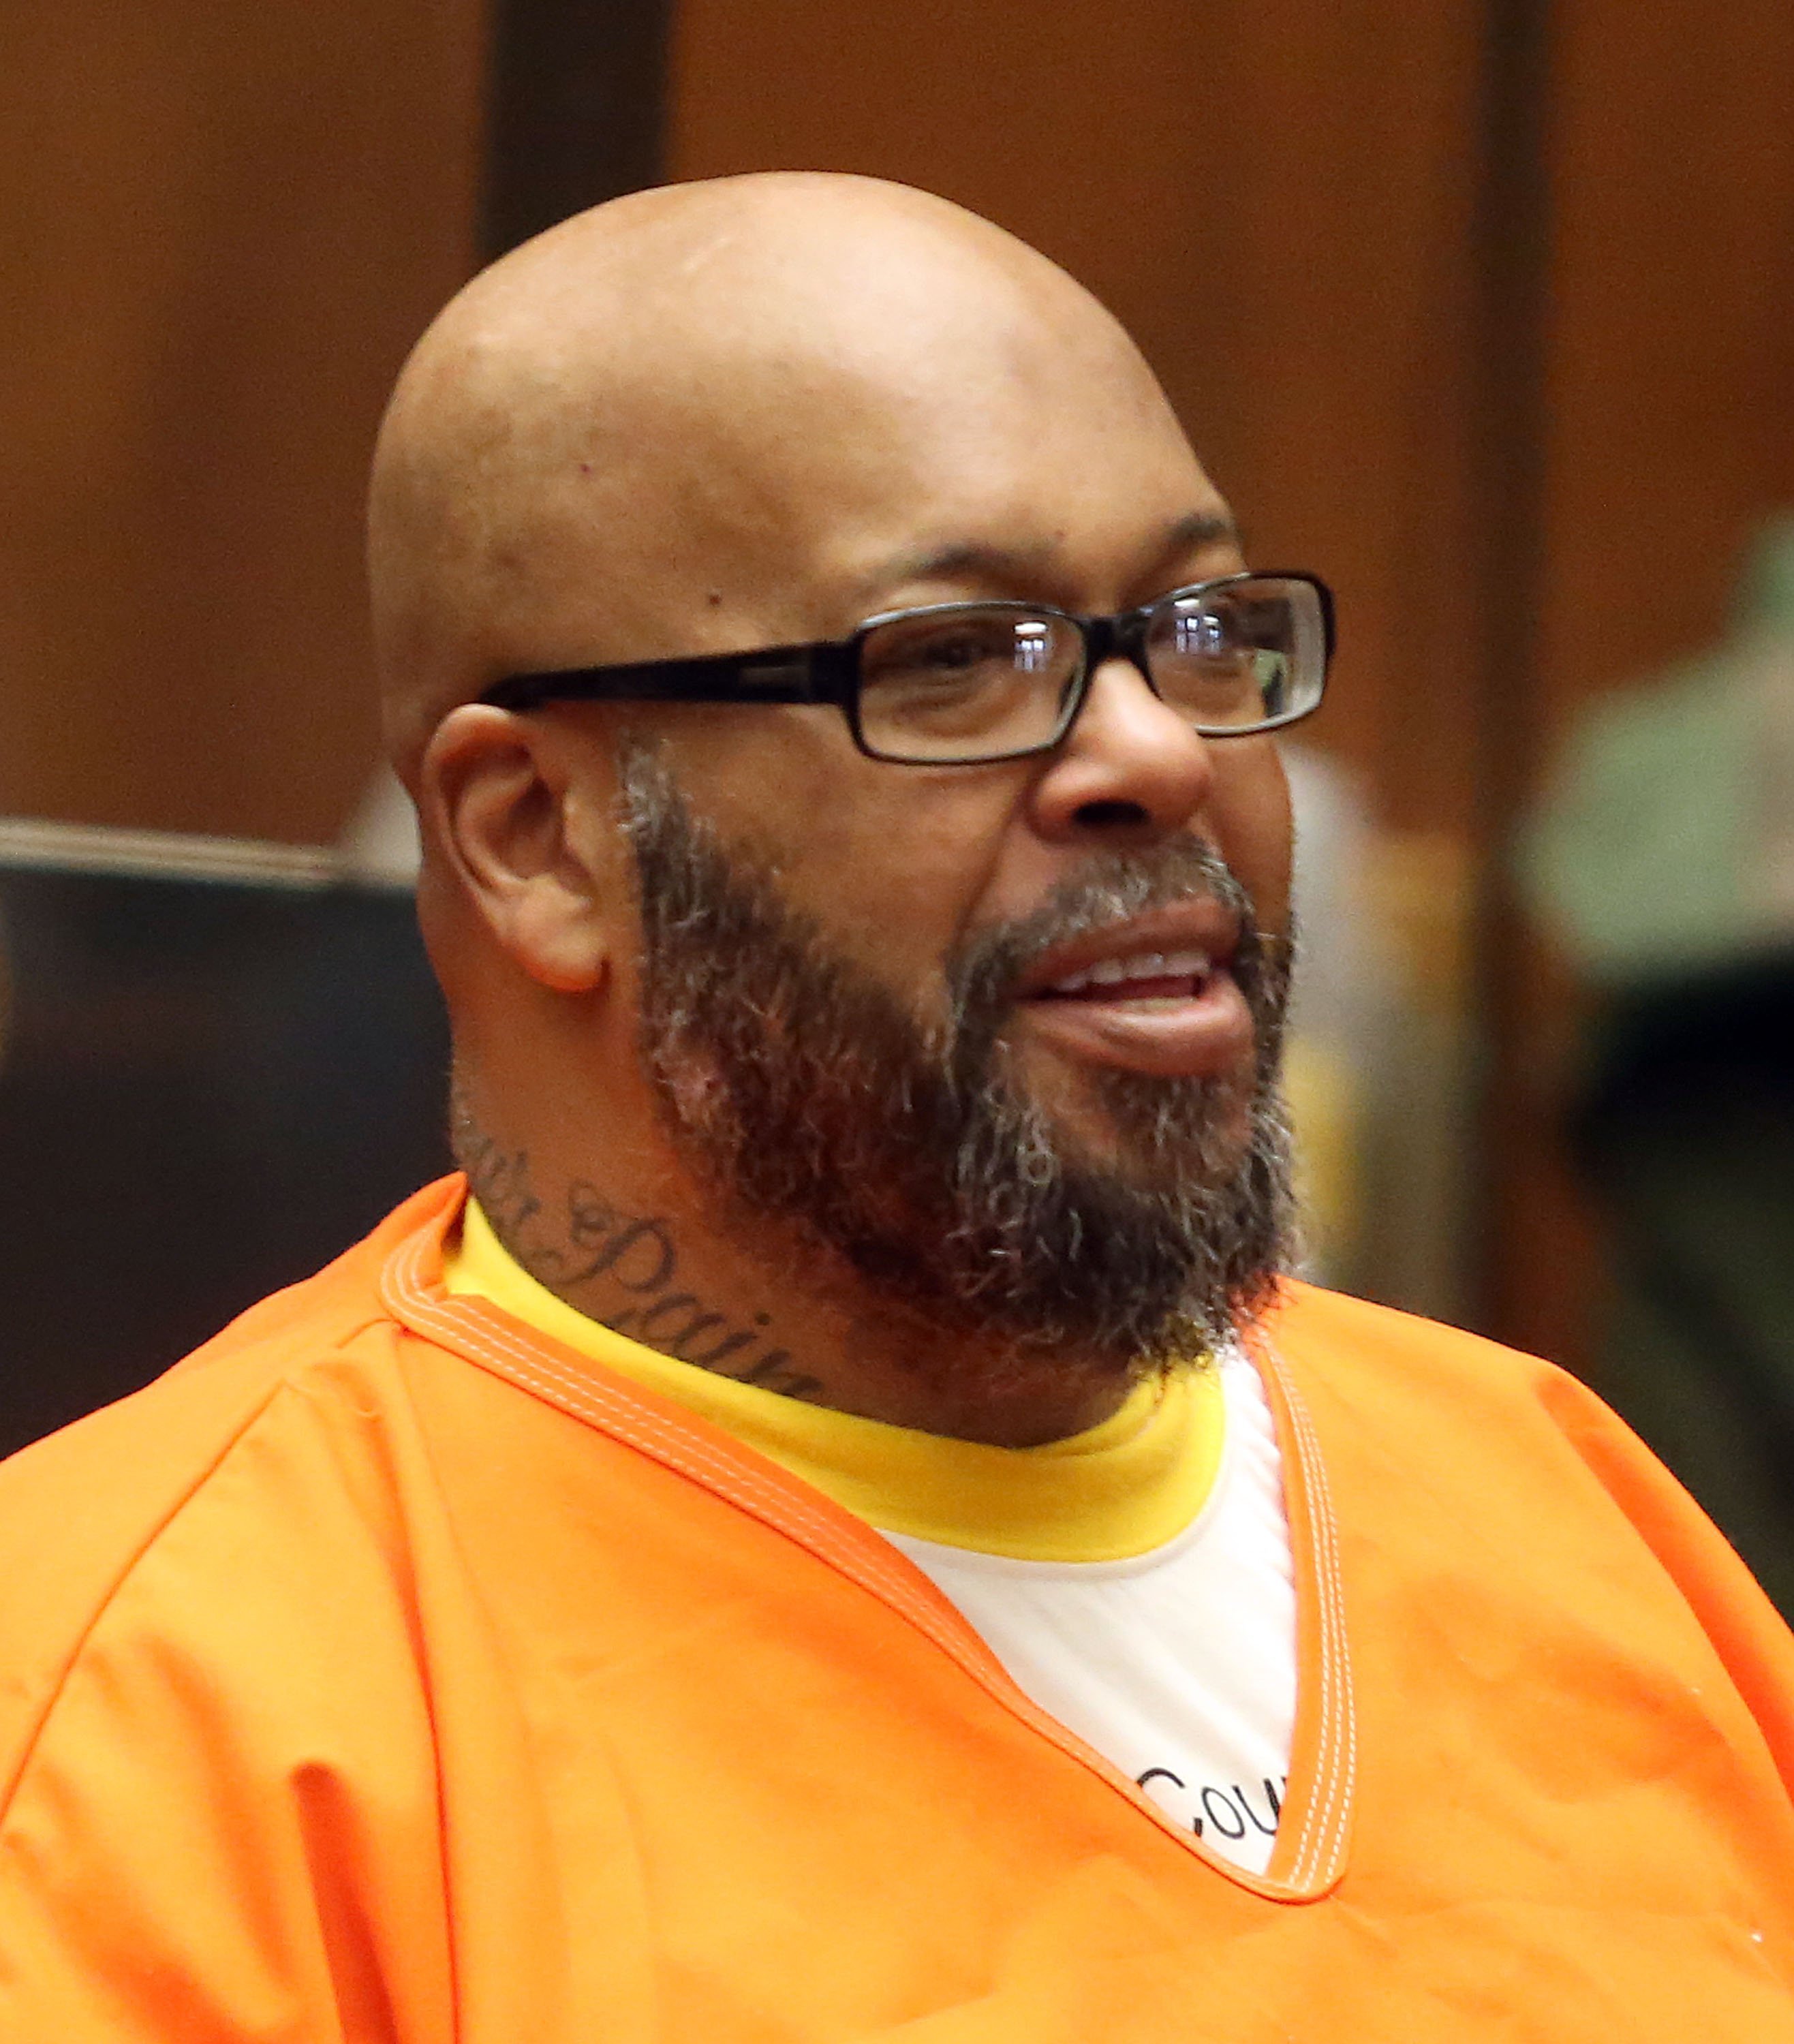 Suge Knight appears in court for a pretrial hearing at the Clara Shortridge Foltz Criminal Justice Center on Feb. 26, 2016 in California | Photo: Getty Images